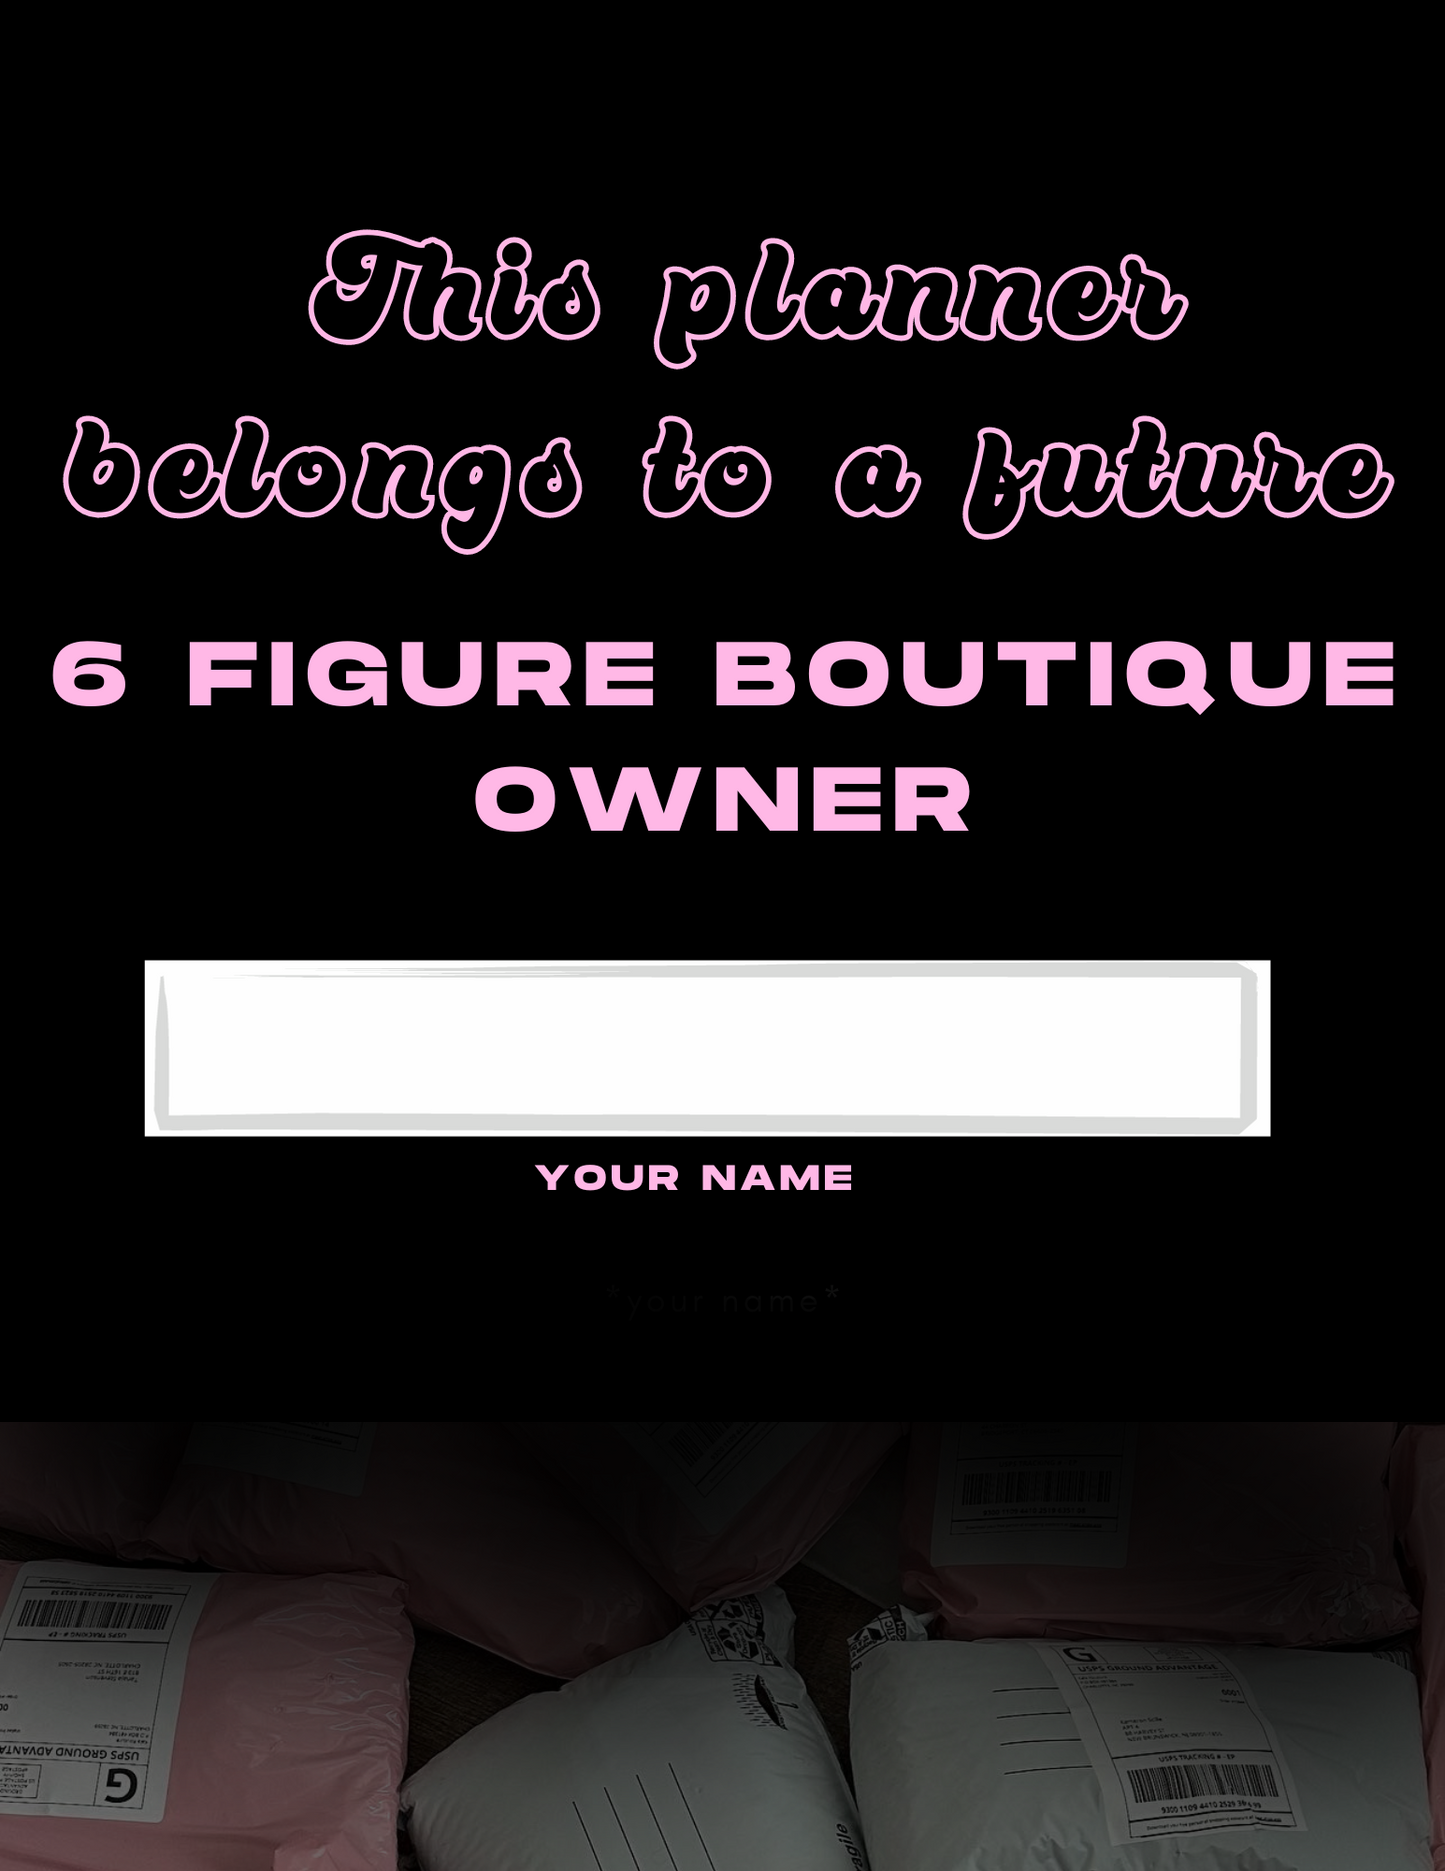 JUMPSTART YOUR BOUTIQUE IN 30 DAYS OR LESS! ACTIONABLE STEP BY STEP GUIDE!